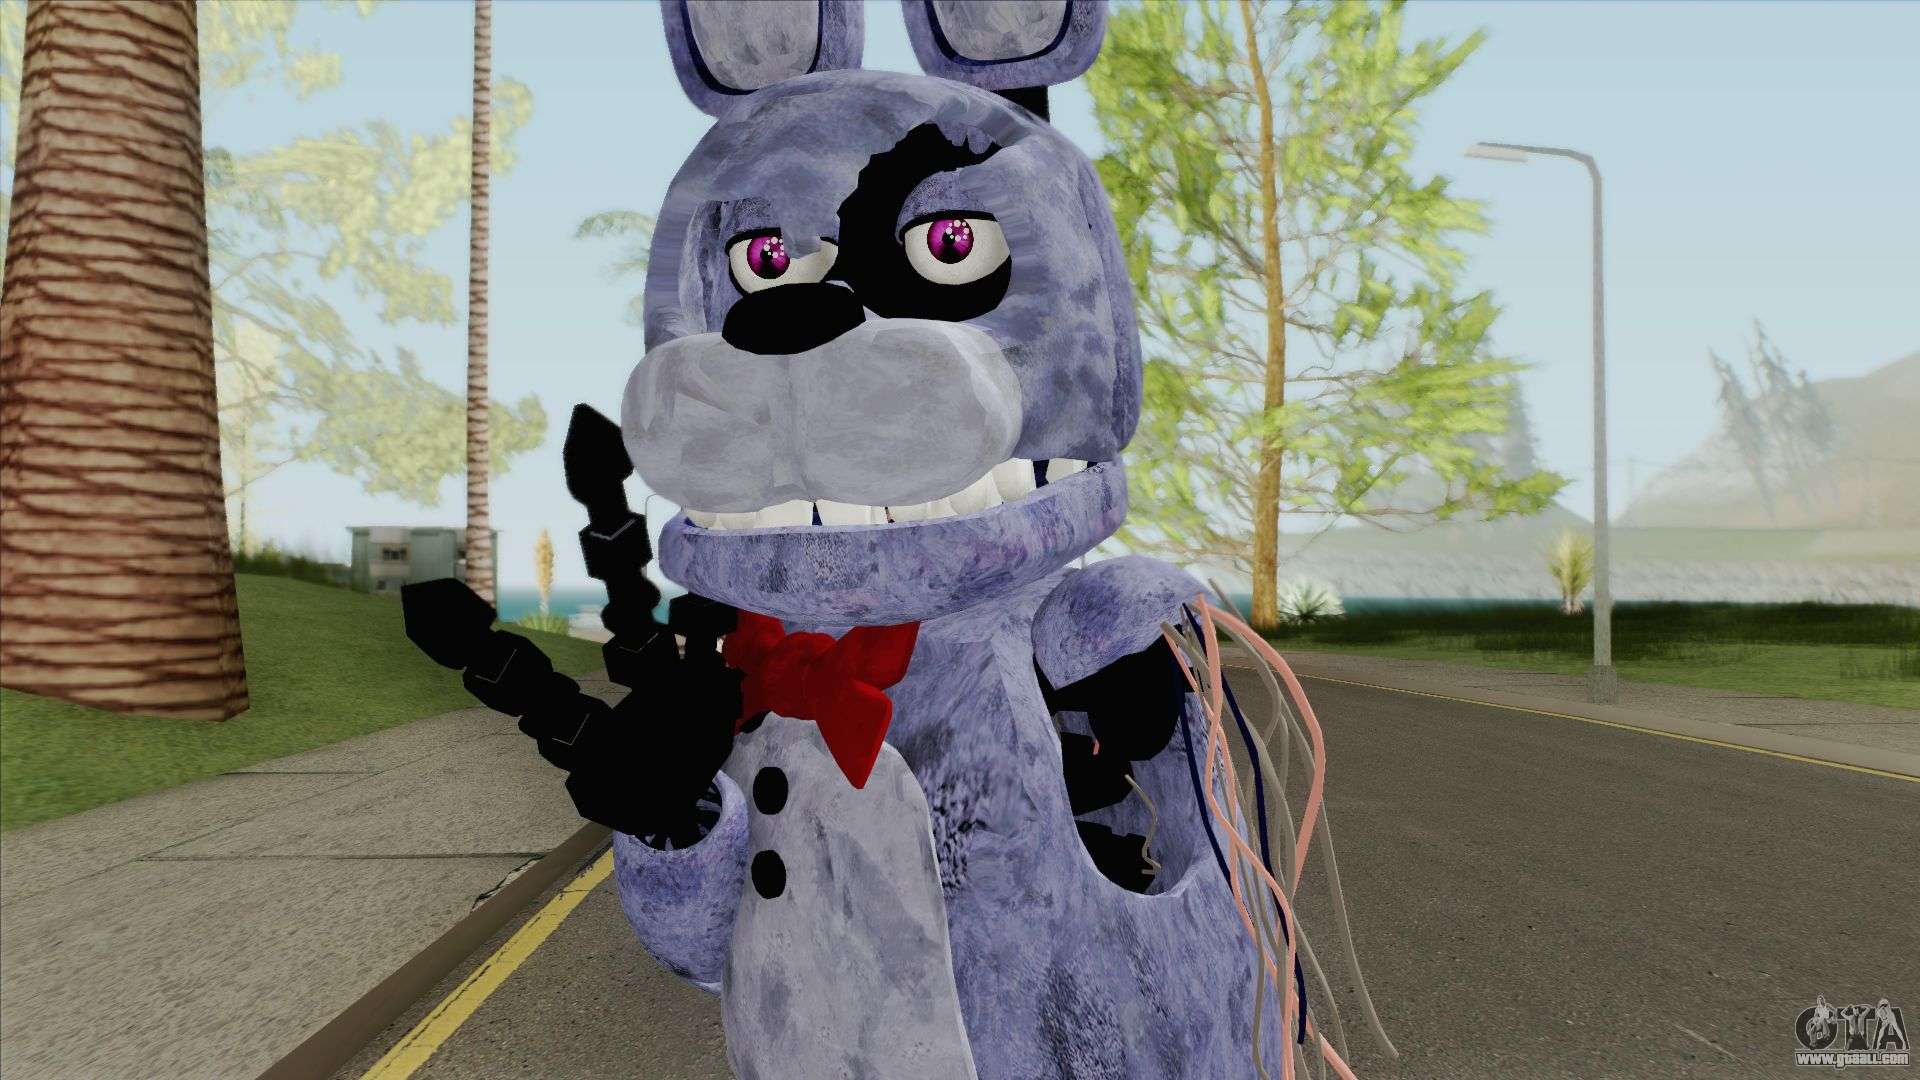 Download Withered Bonnie [Five Nights At Freddy's 2] for GTA San